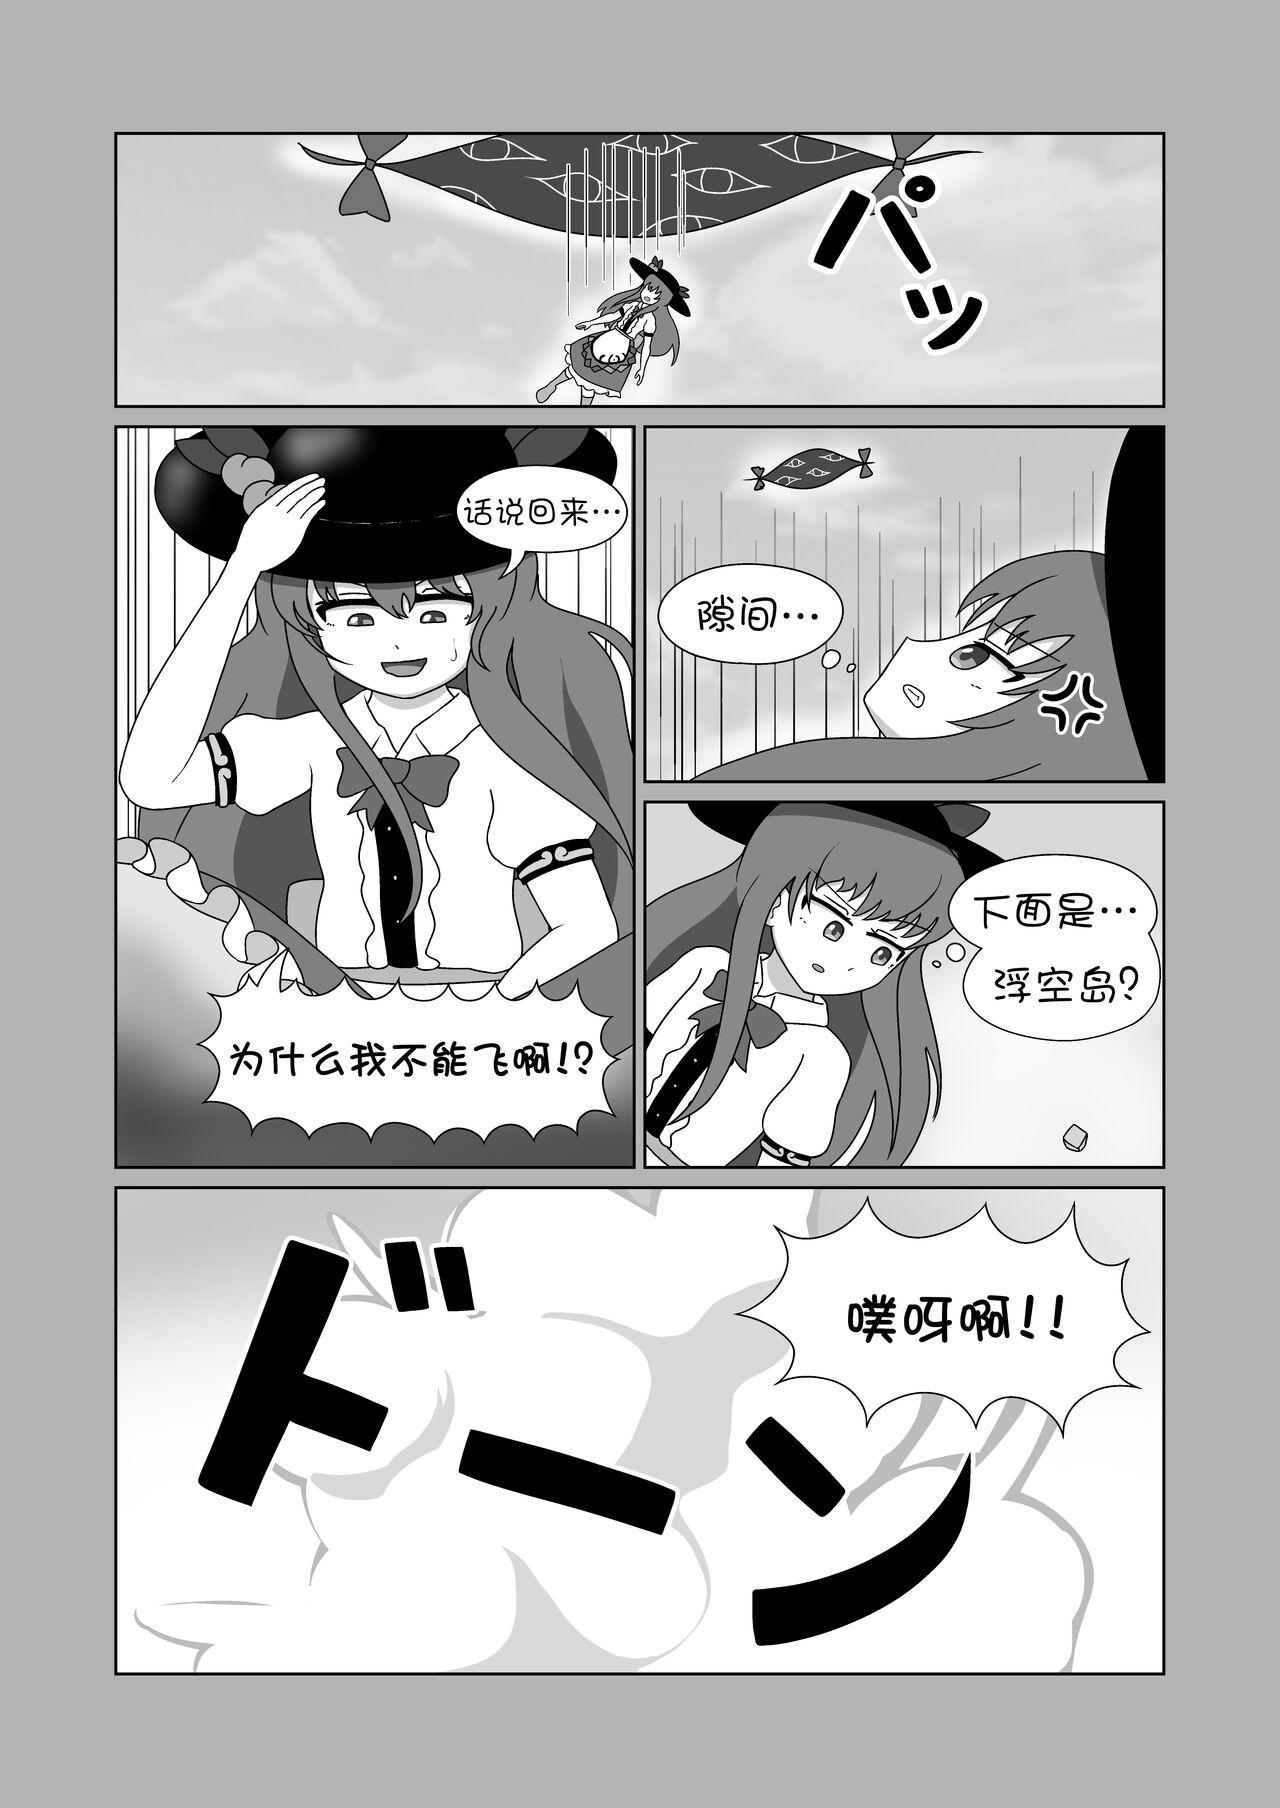 Humiliation Pov 天子 in BecomeFumo - Touhou project Rimjob - Page 4